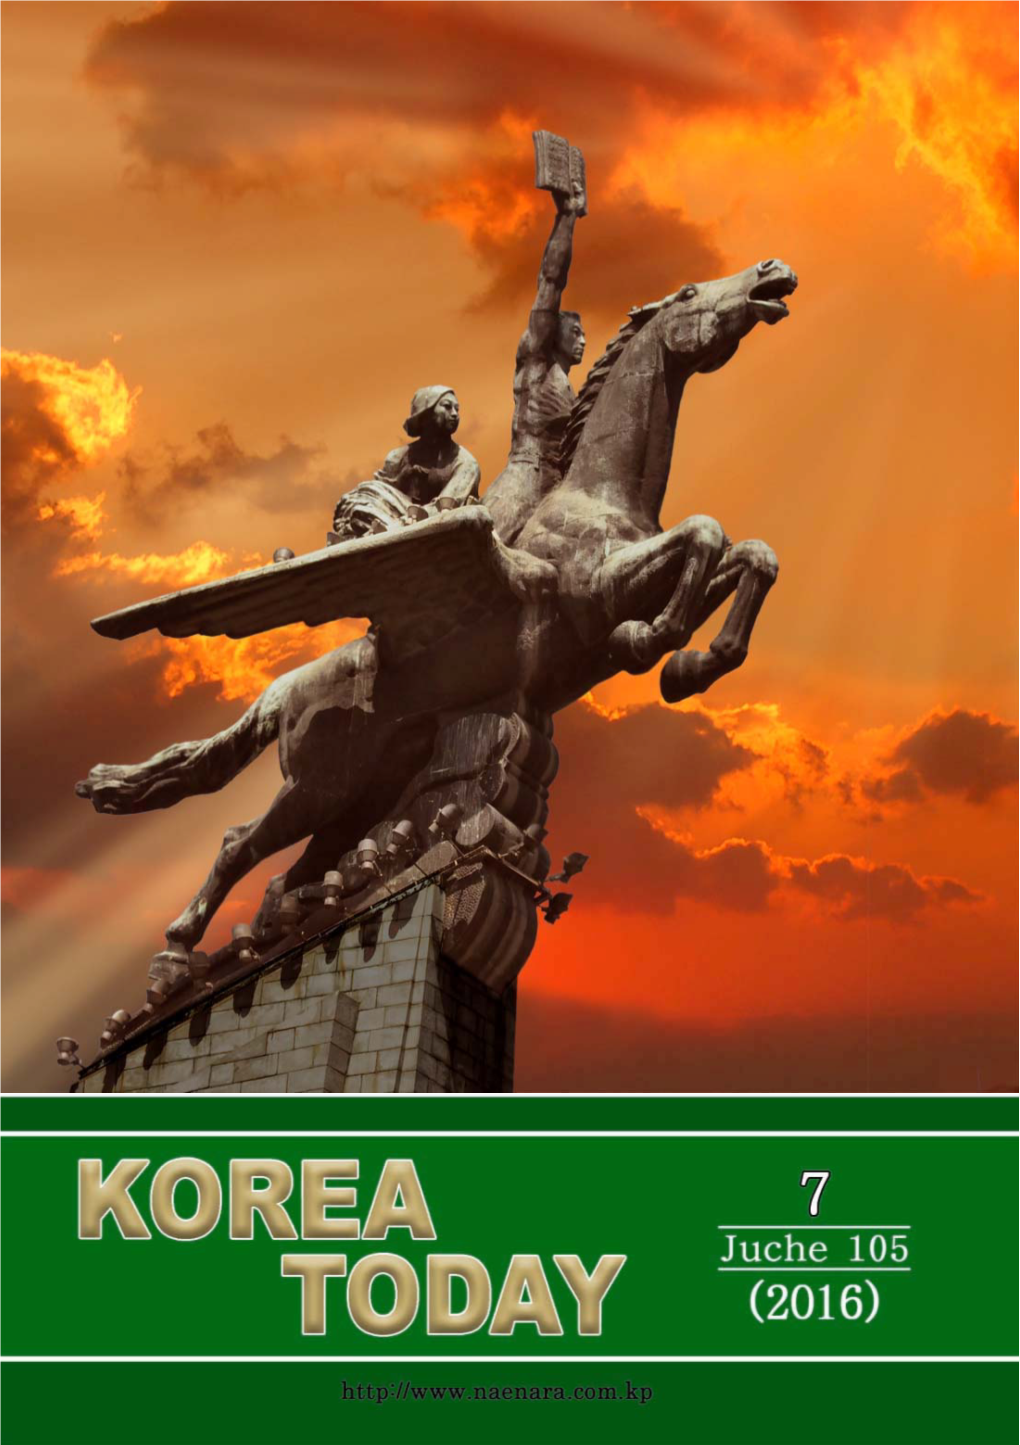 KOREA TODAY No. 7, 2016 KOREA TODAY Monthly Journal (721) Printed in English, Russian and Chinese